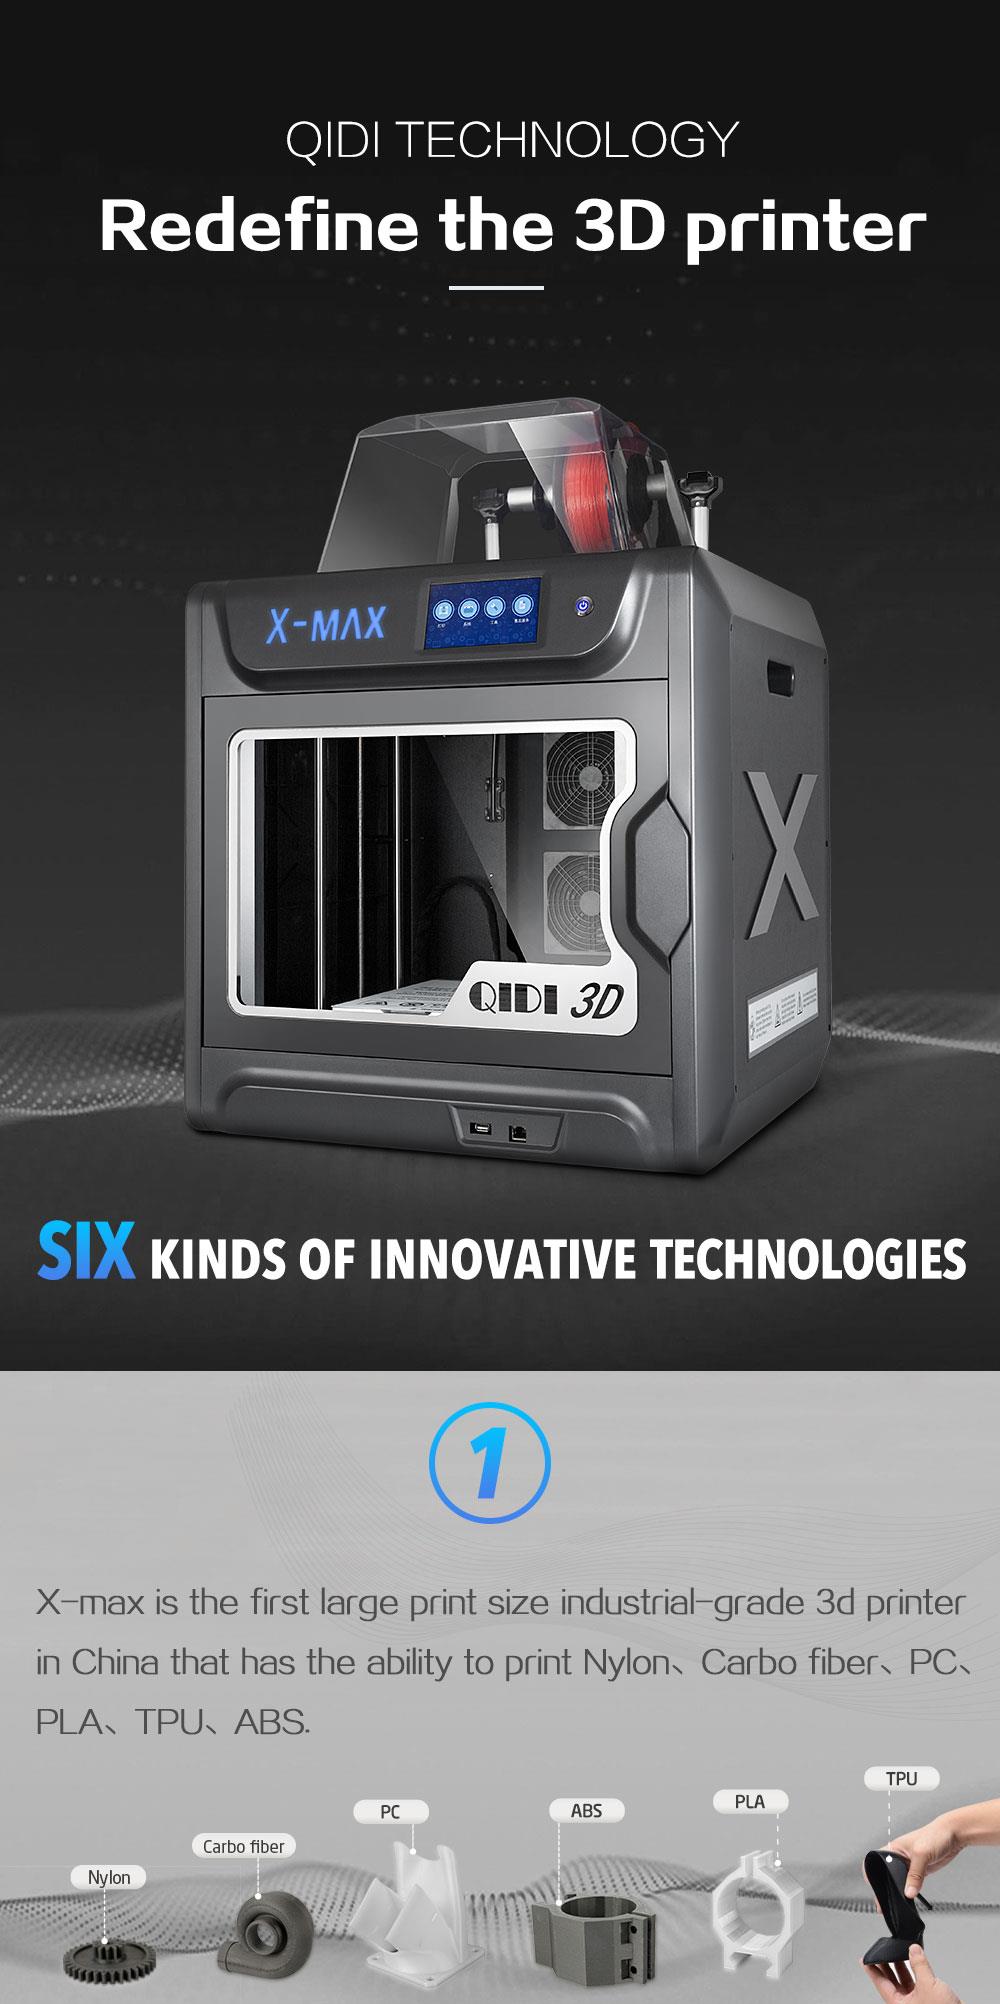 QIDI TECH X-MAX 3D Printer with 240 Degree Celsius High-Temp Extruder, 5 Inch Touchscreen, WiFi Function, 300x250x300